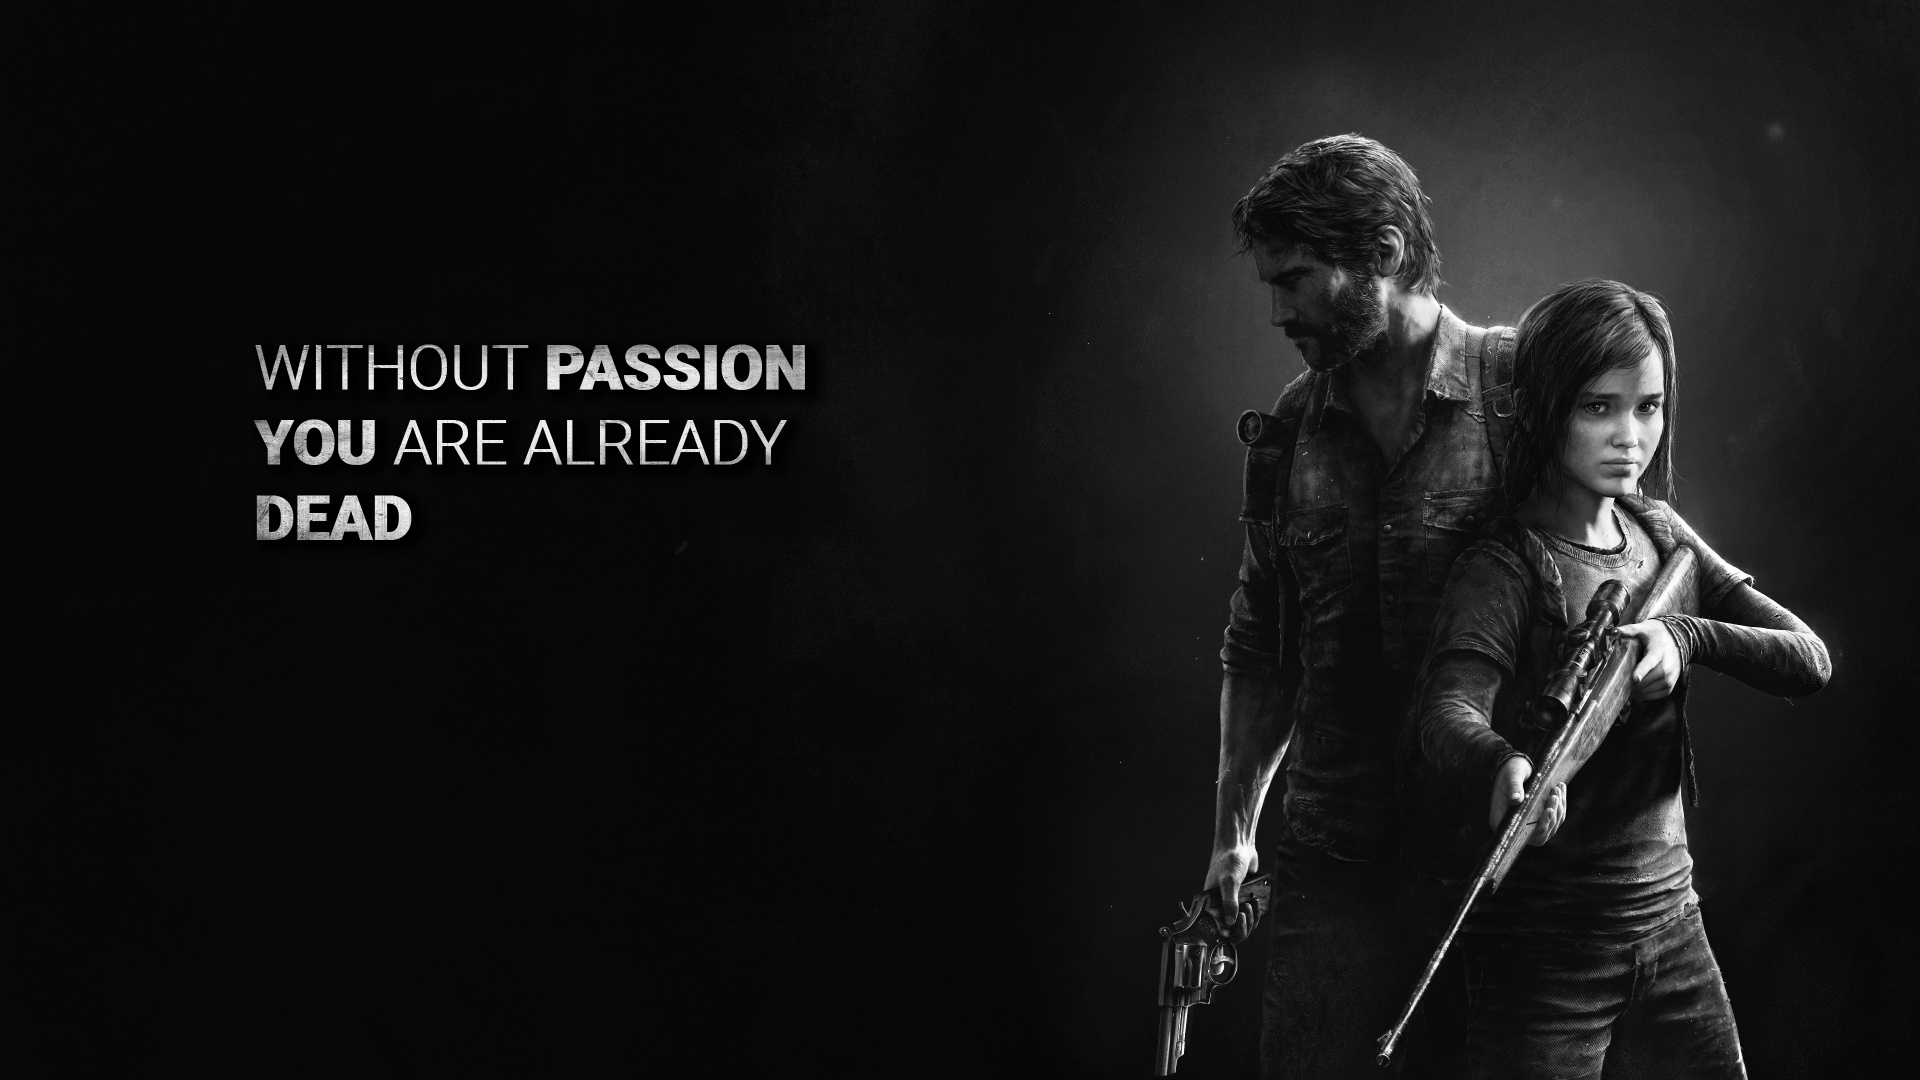 1920x1080 The Last Of Us Part 2 4k 2020 Laptop Full HD 1080P ,HD 4k  Wallpapers,Images,Backgrounds,Photos and Pictures